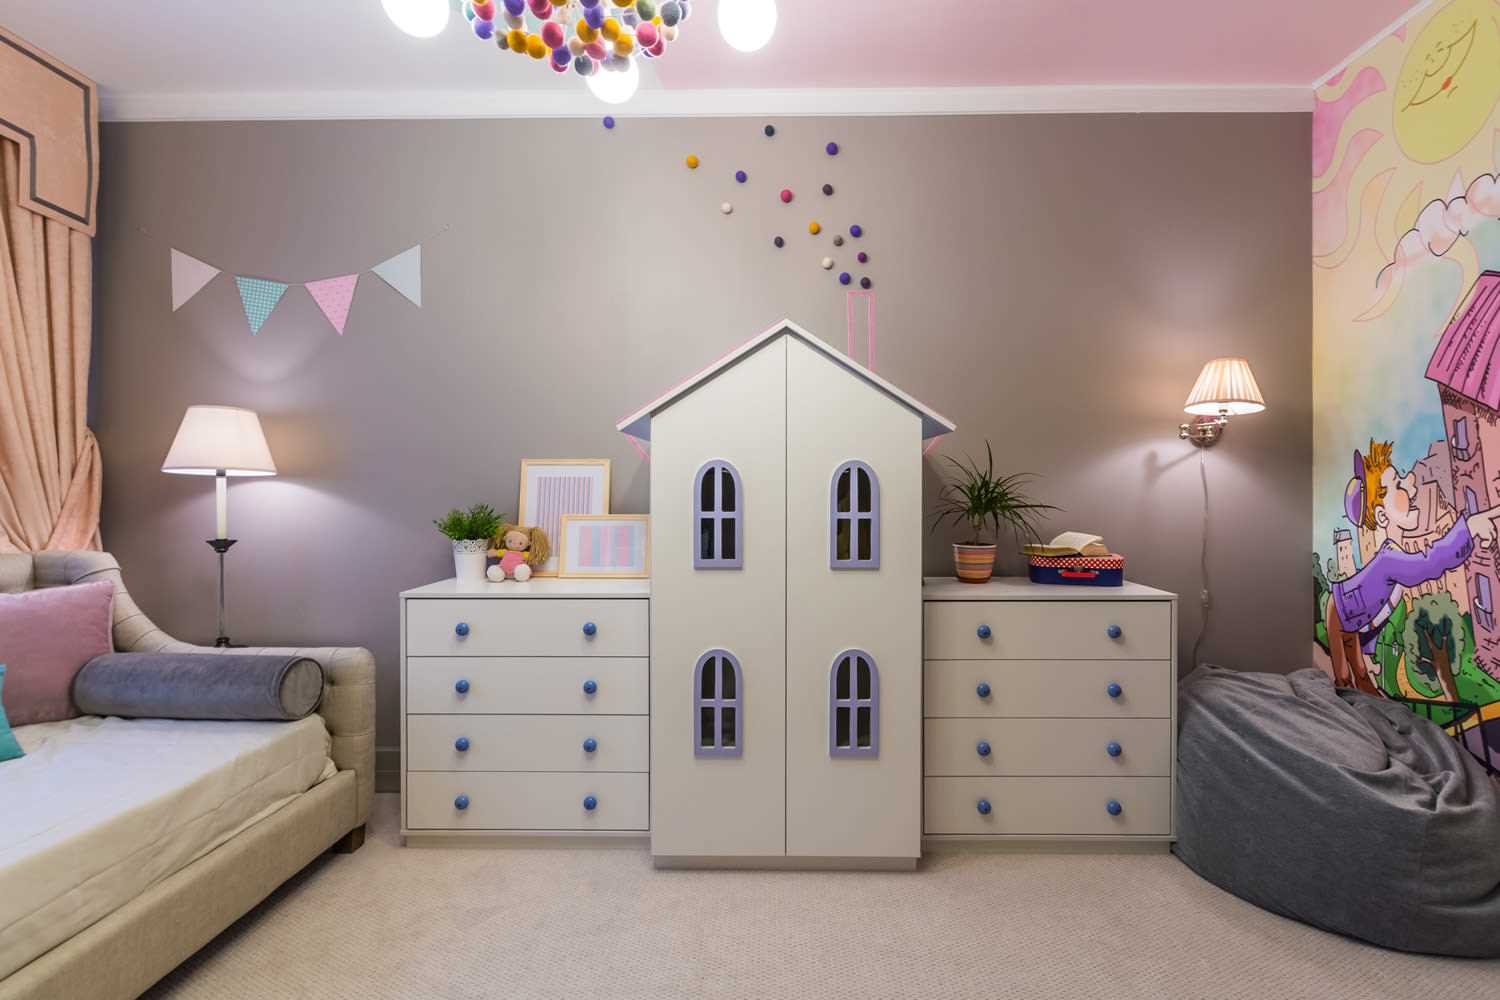 variant of a bright interior for a child’s room for a girl